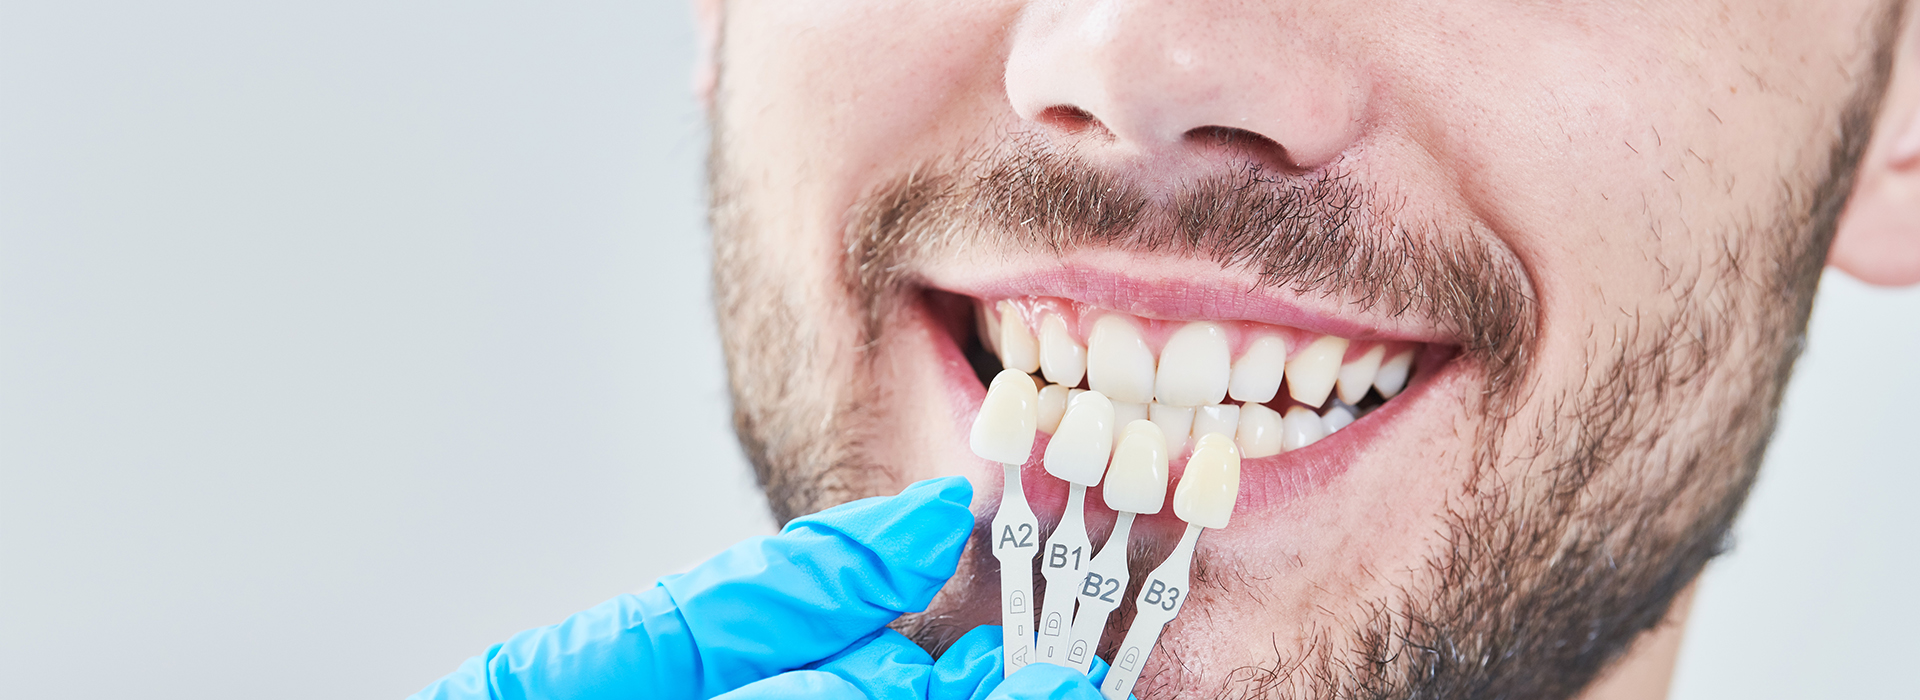 Hanhan Dental | Implant Dentistry, Cosmetic Dentistry and Extractions